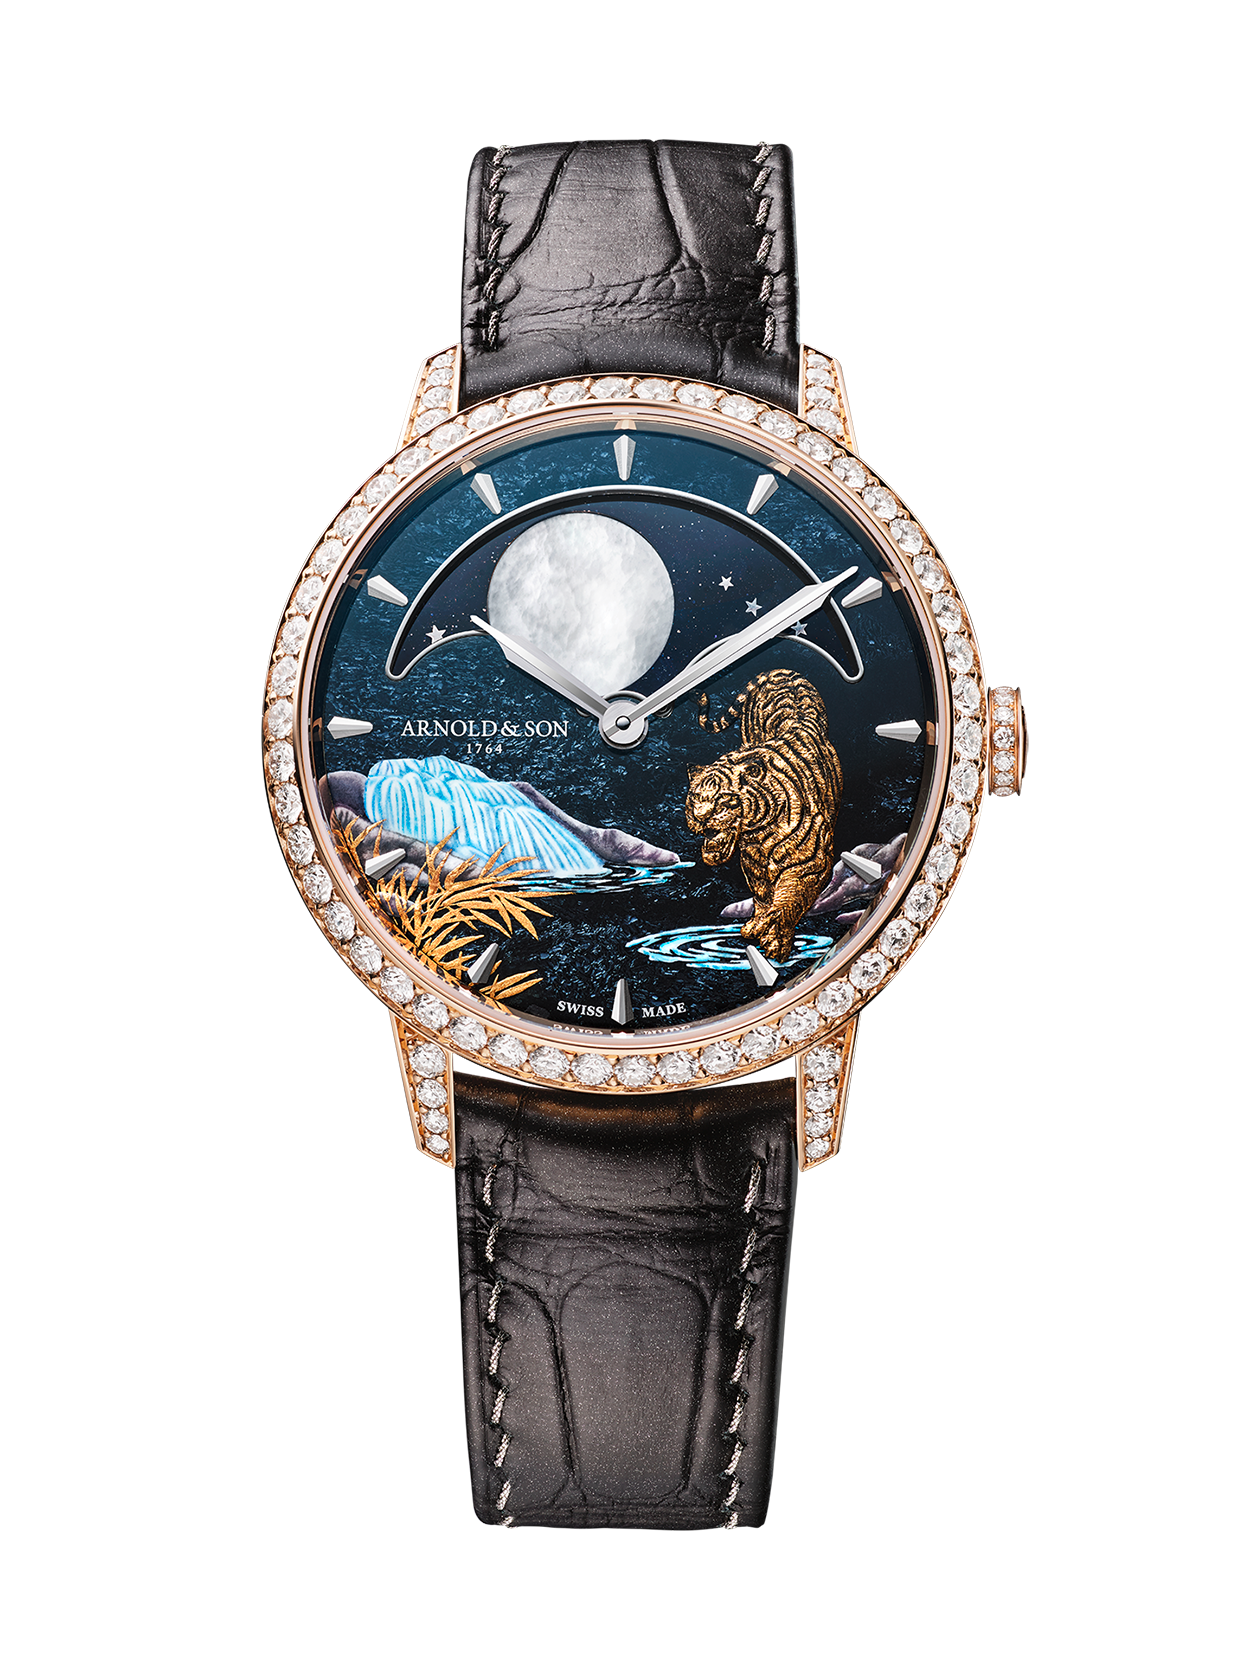 PERPETUAL MOON 38 "YEAR OF THE TIGER"